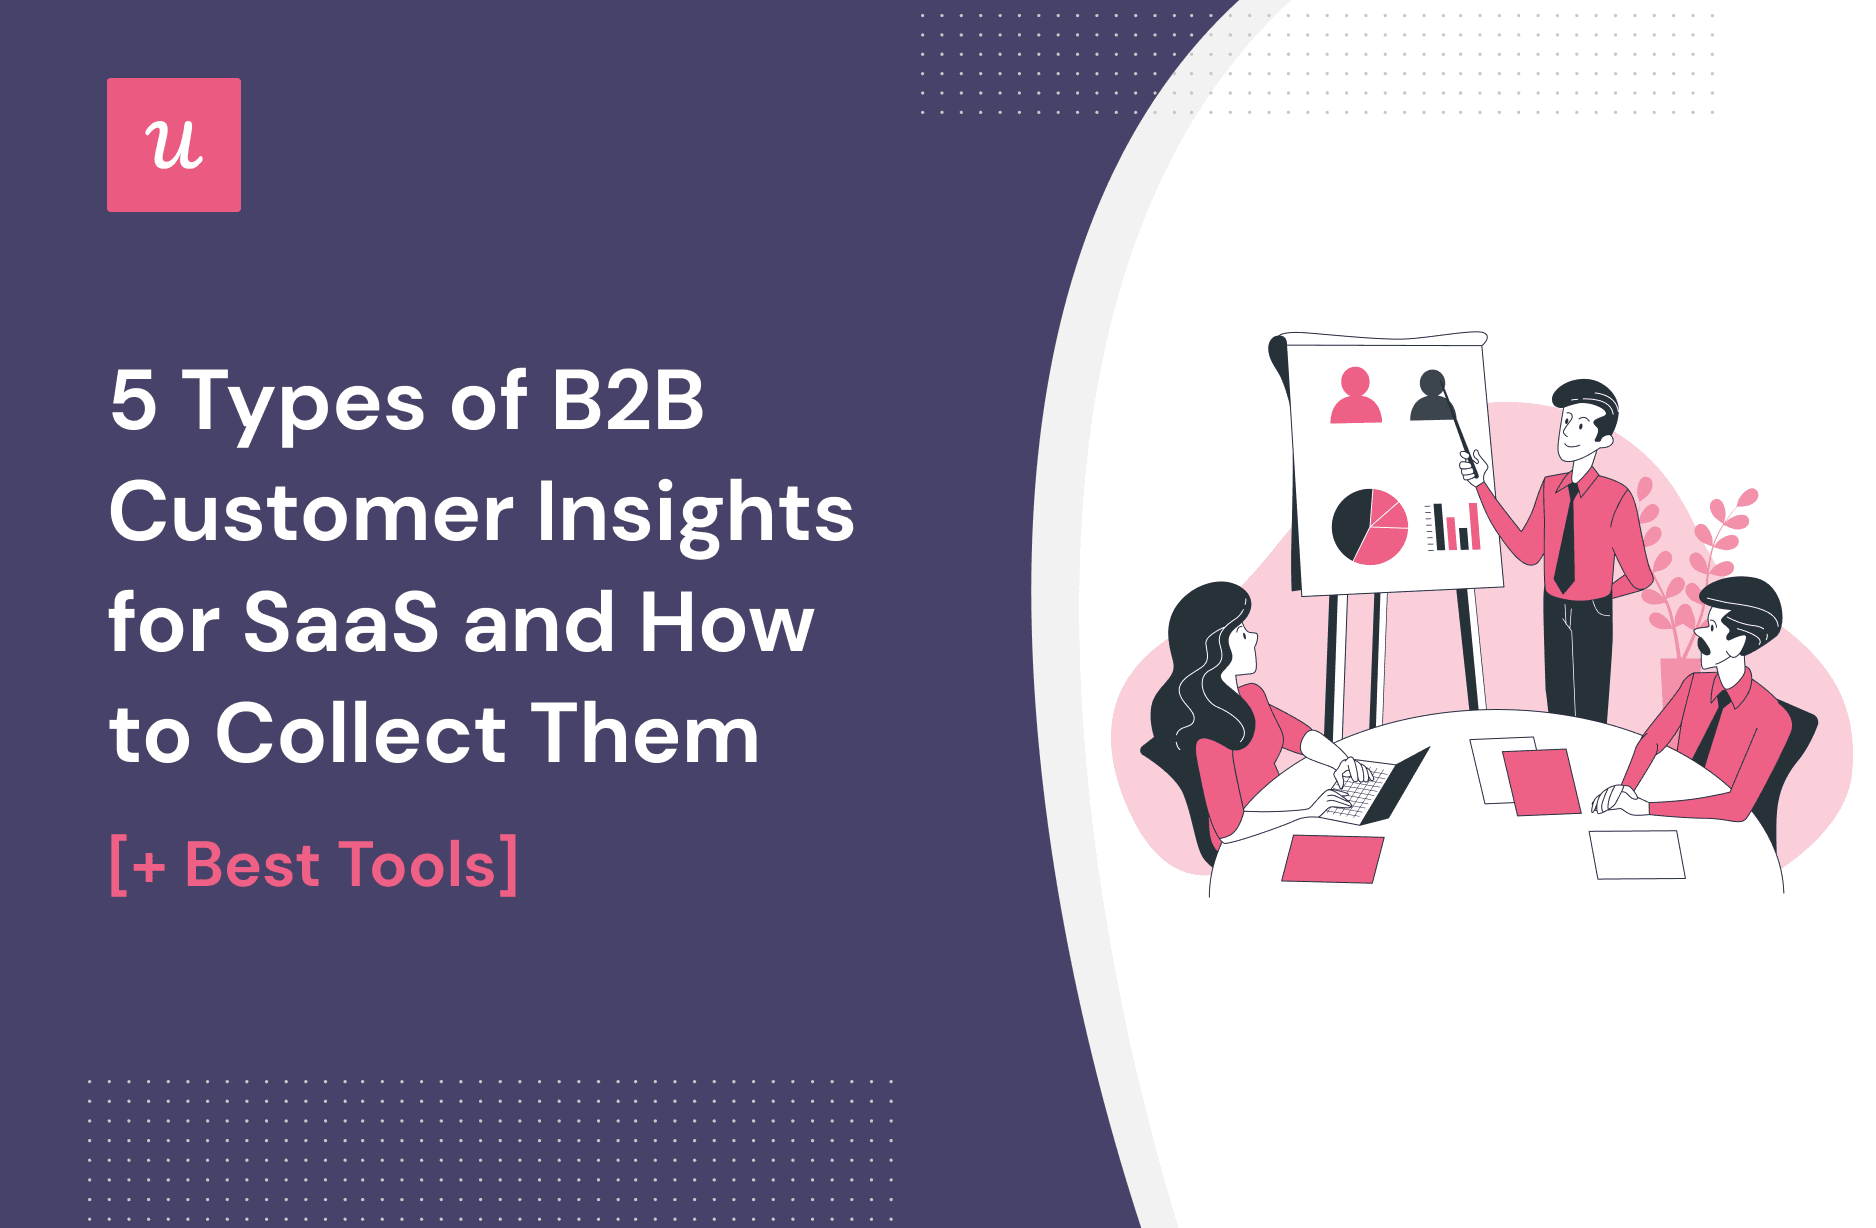 5 Types of B2B Customer Insights for SaaS and How to Collect Them [+Best Tools] cover